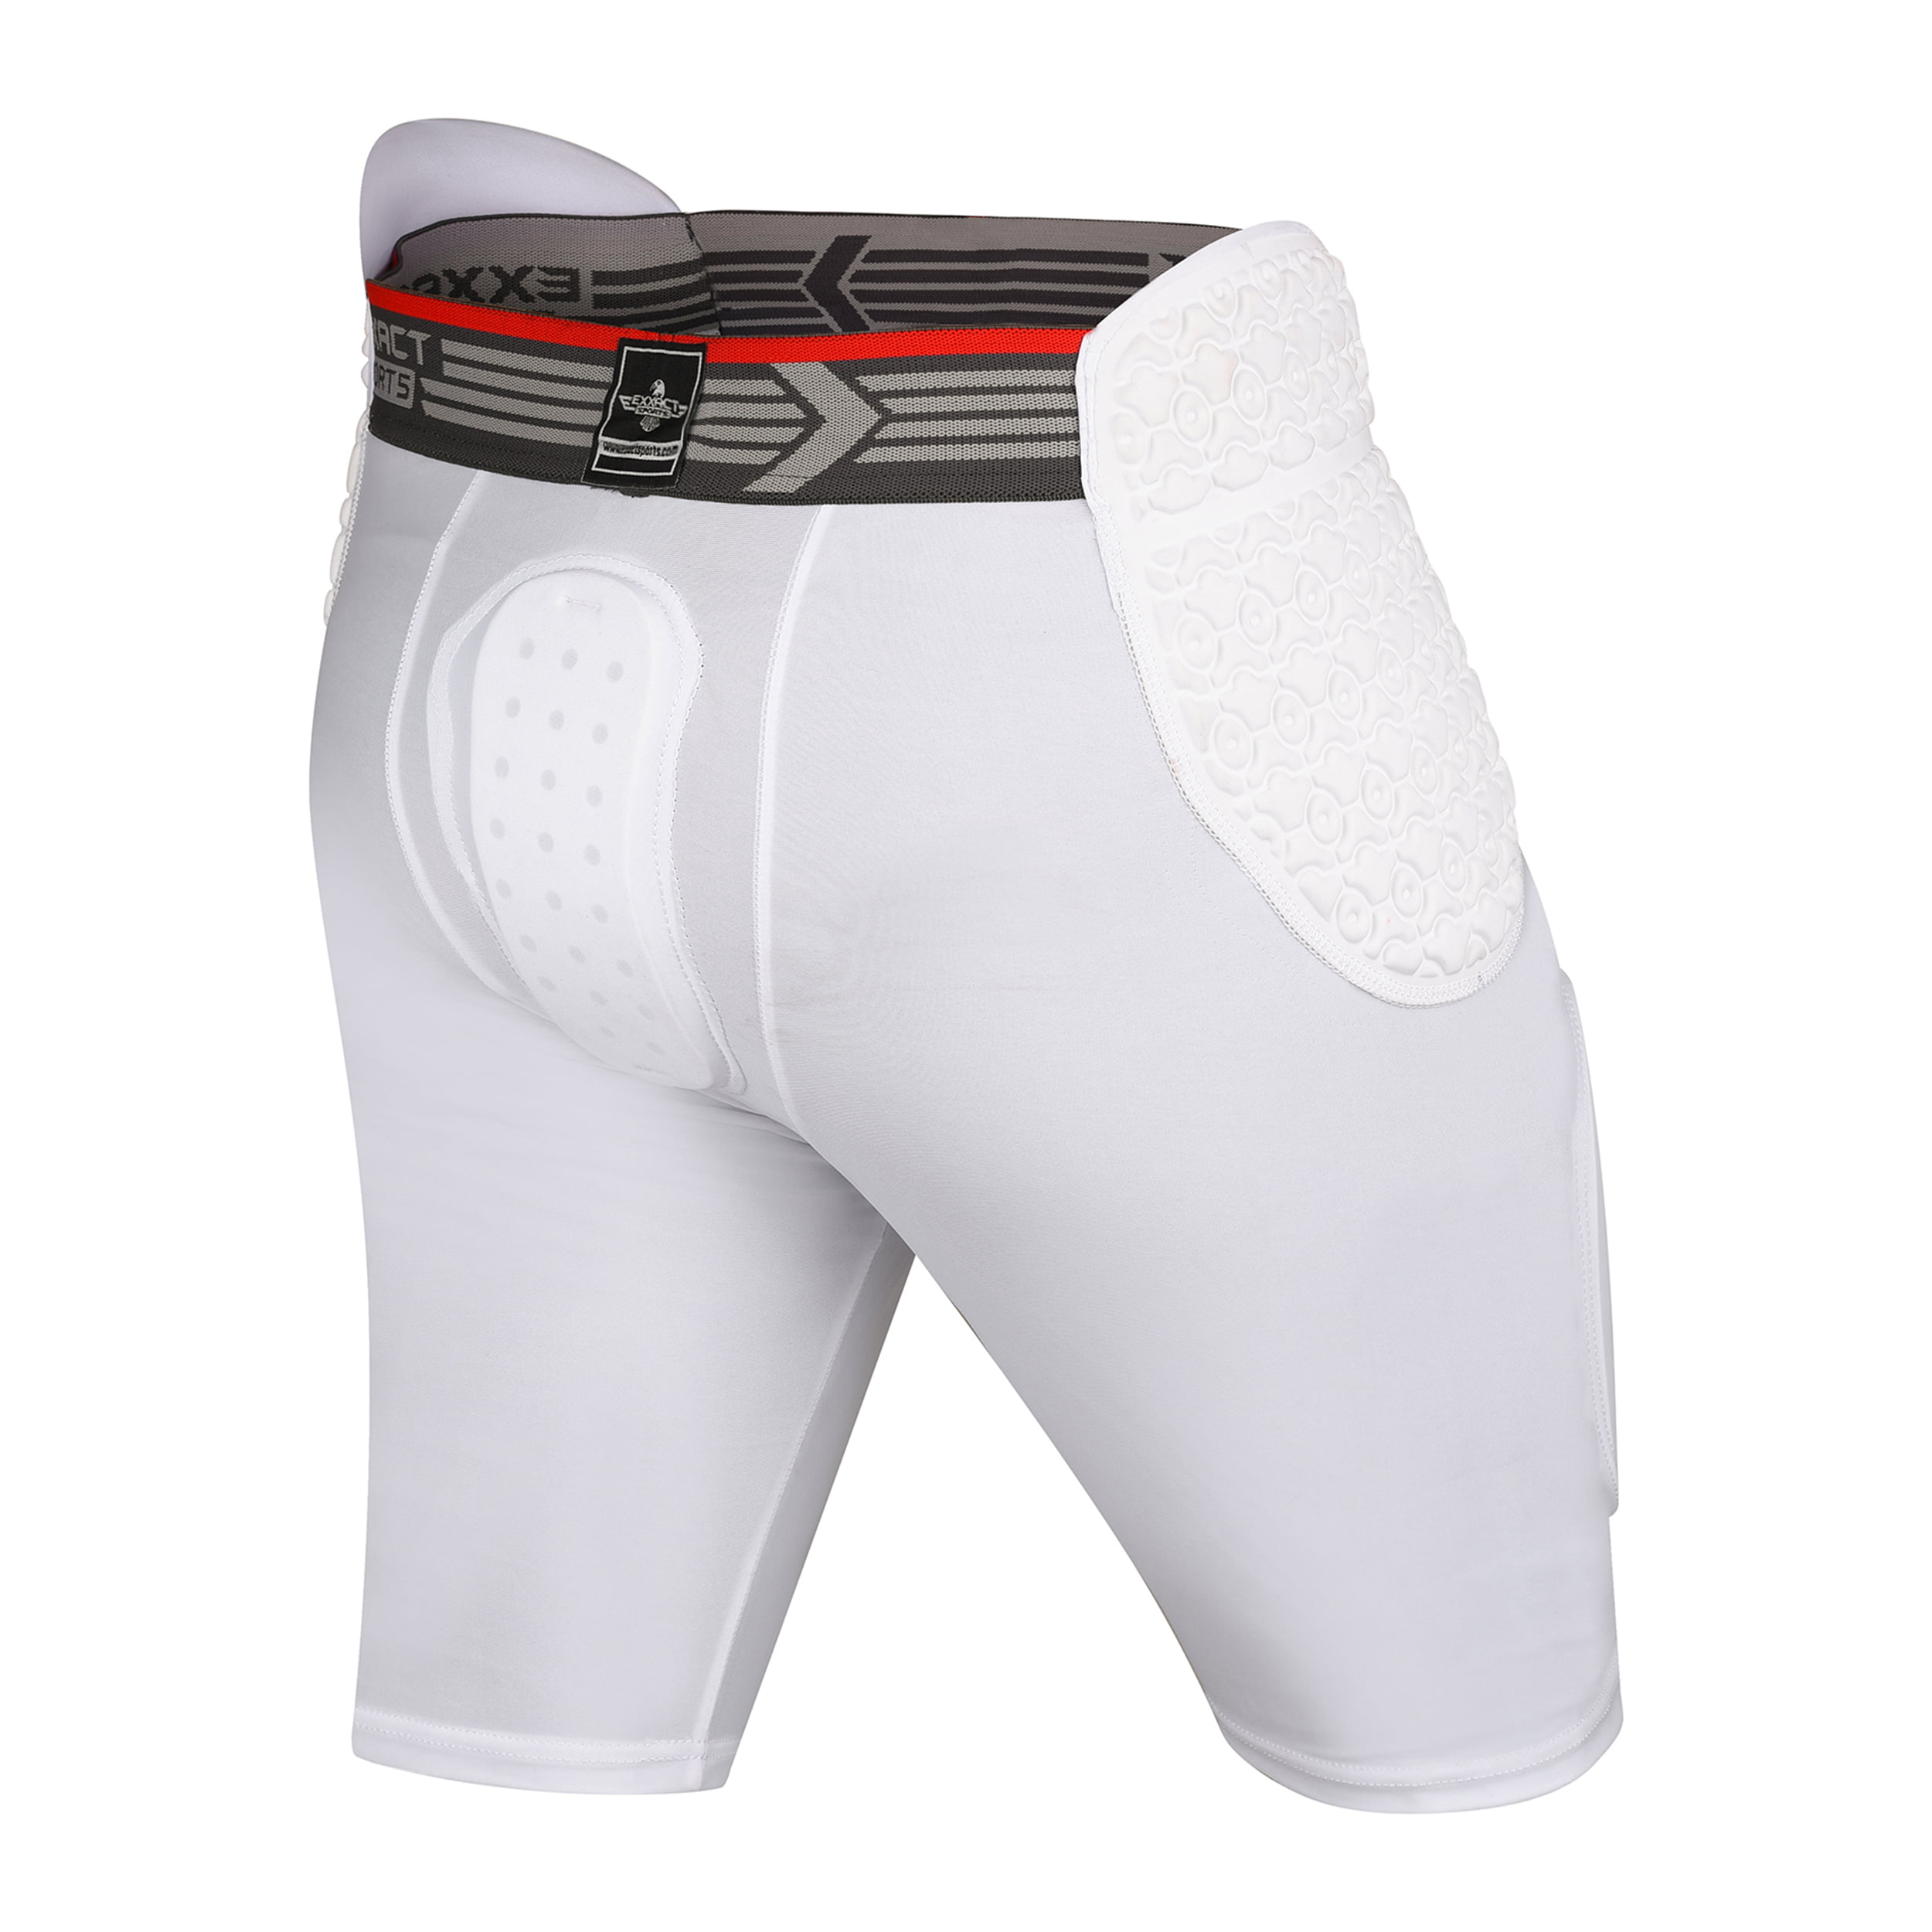 Exxact Sports 'Rebel' 5-Pad Adult Football Girdle w/Integrated Hip